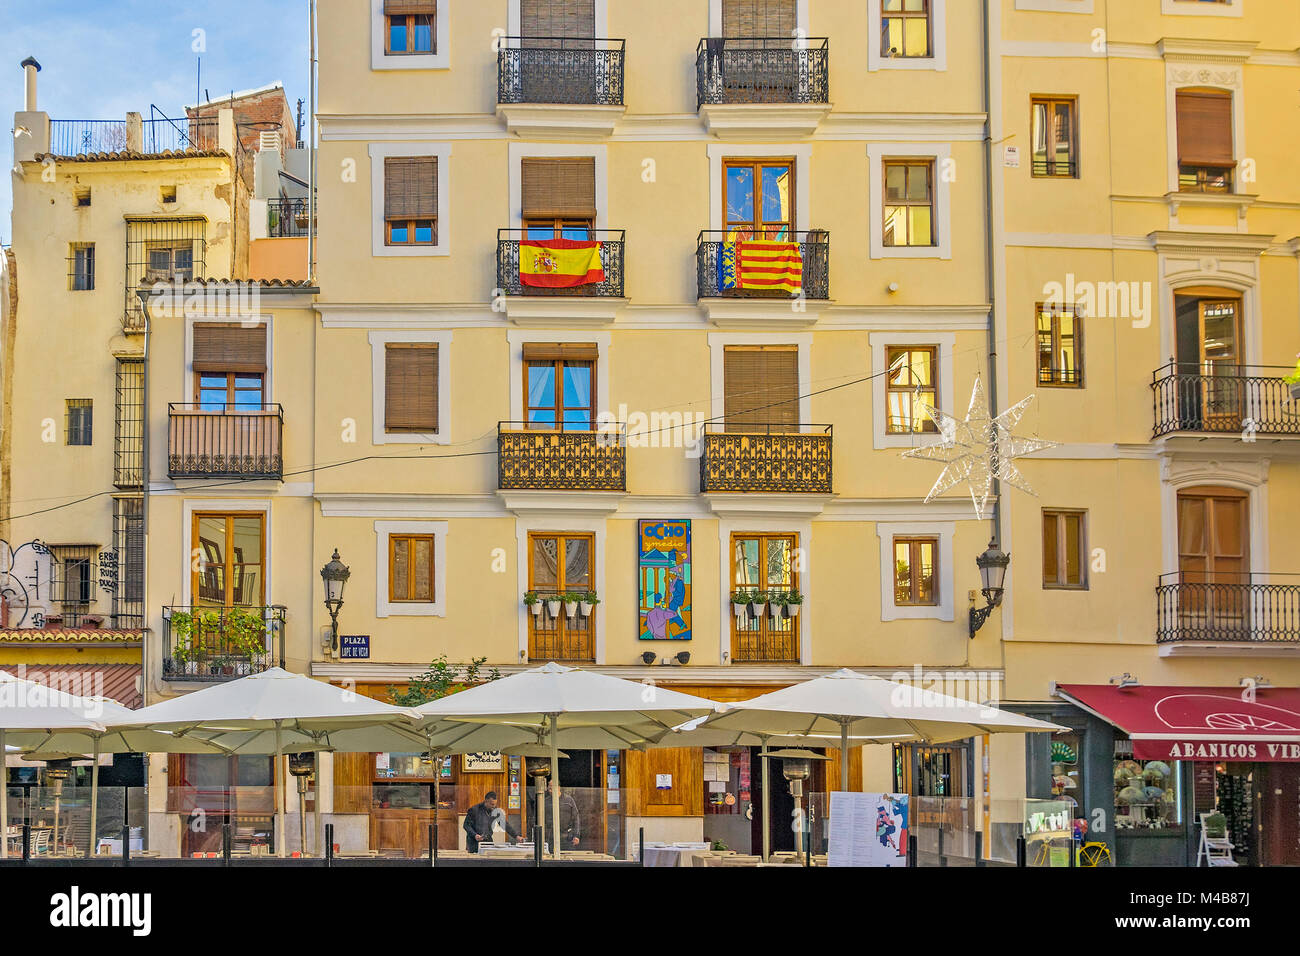 Buildings In The Old Town, Valencia, Spain Stock Photo